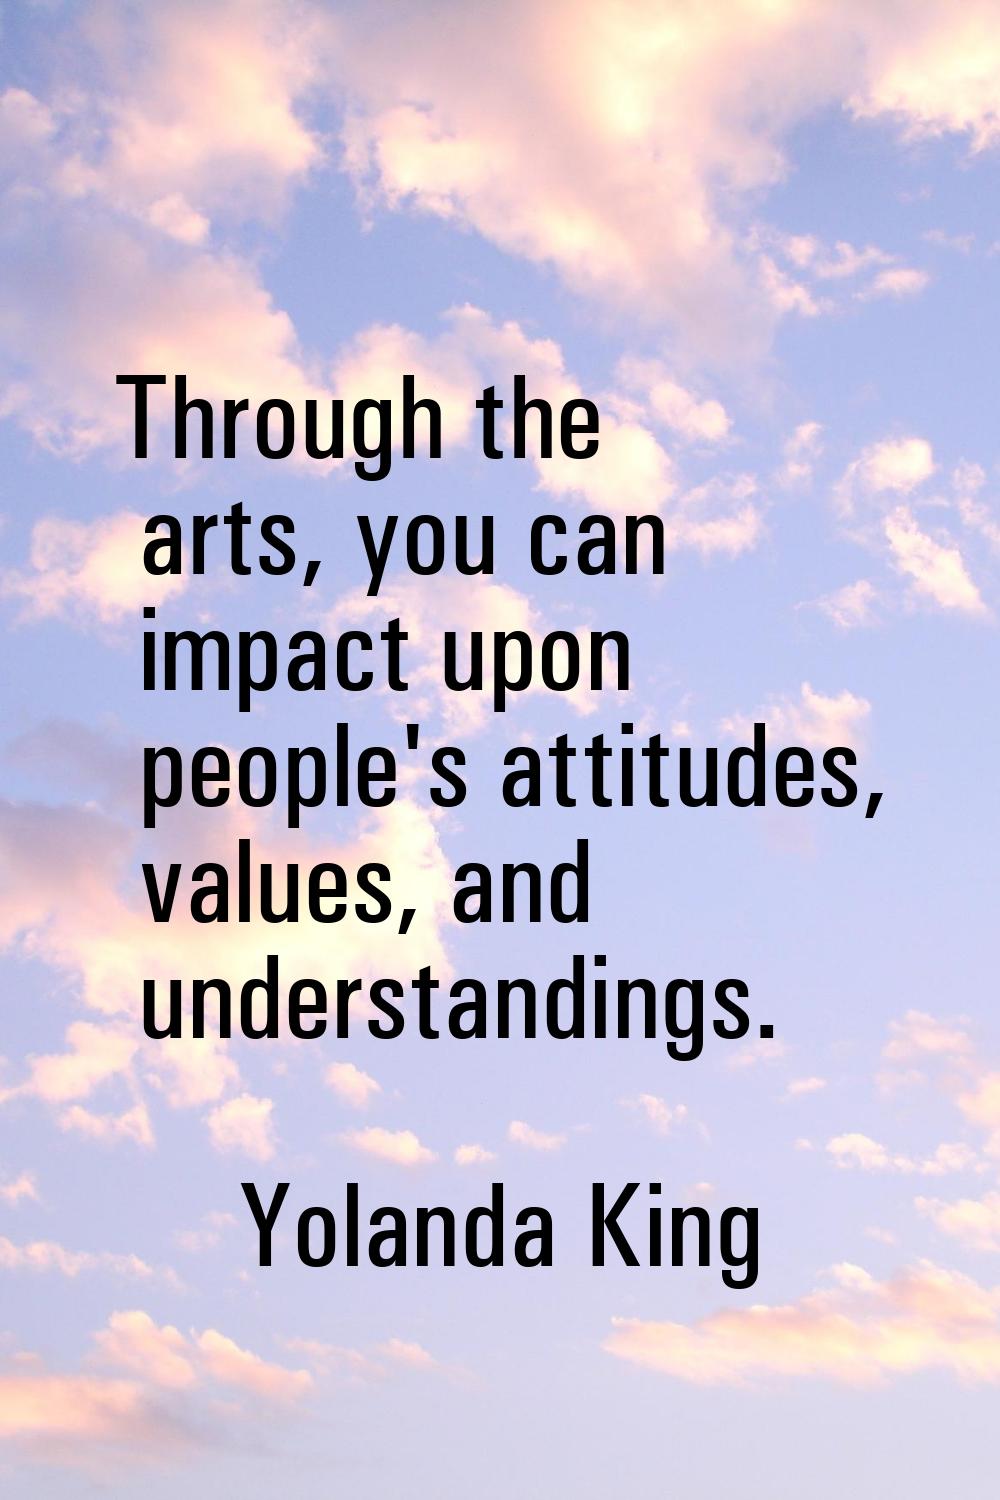 Through the arts, you can impact upon people's attitudes, values, and understandings.